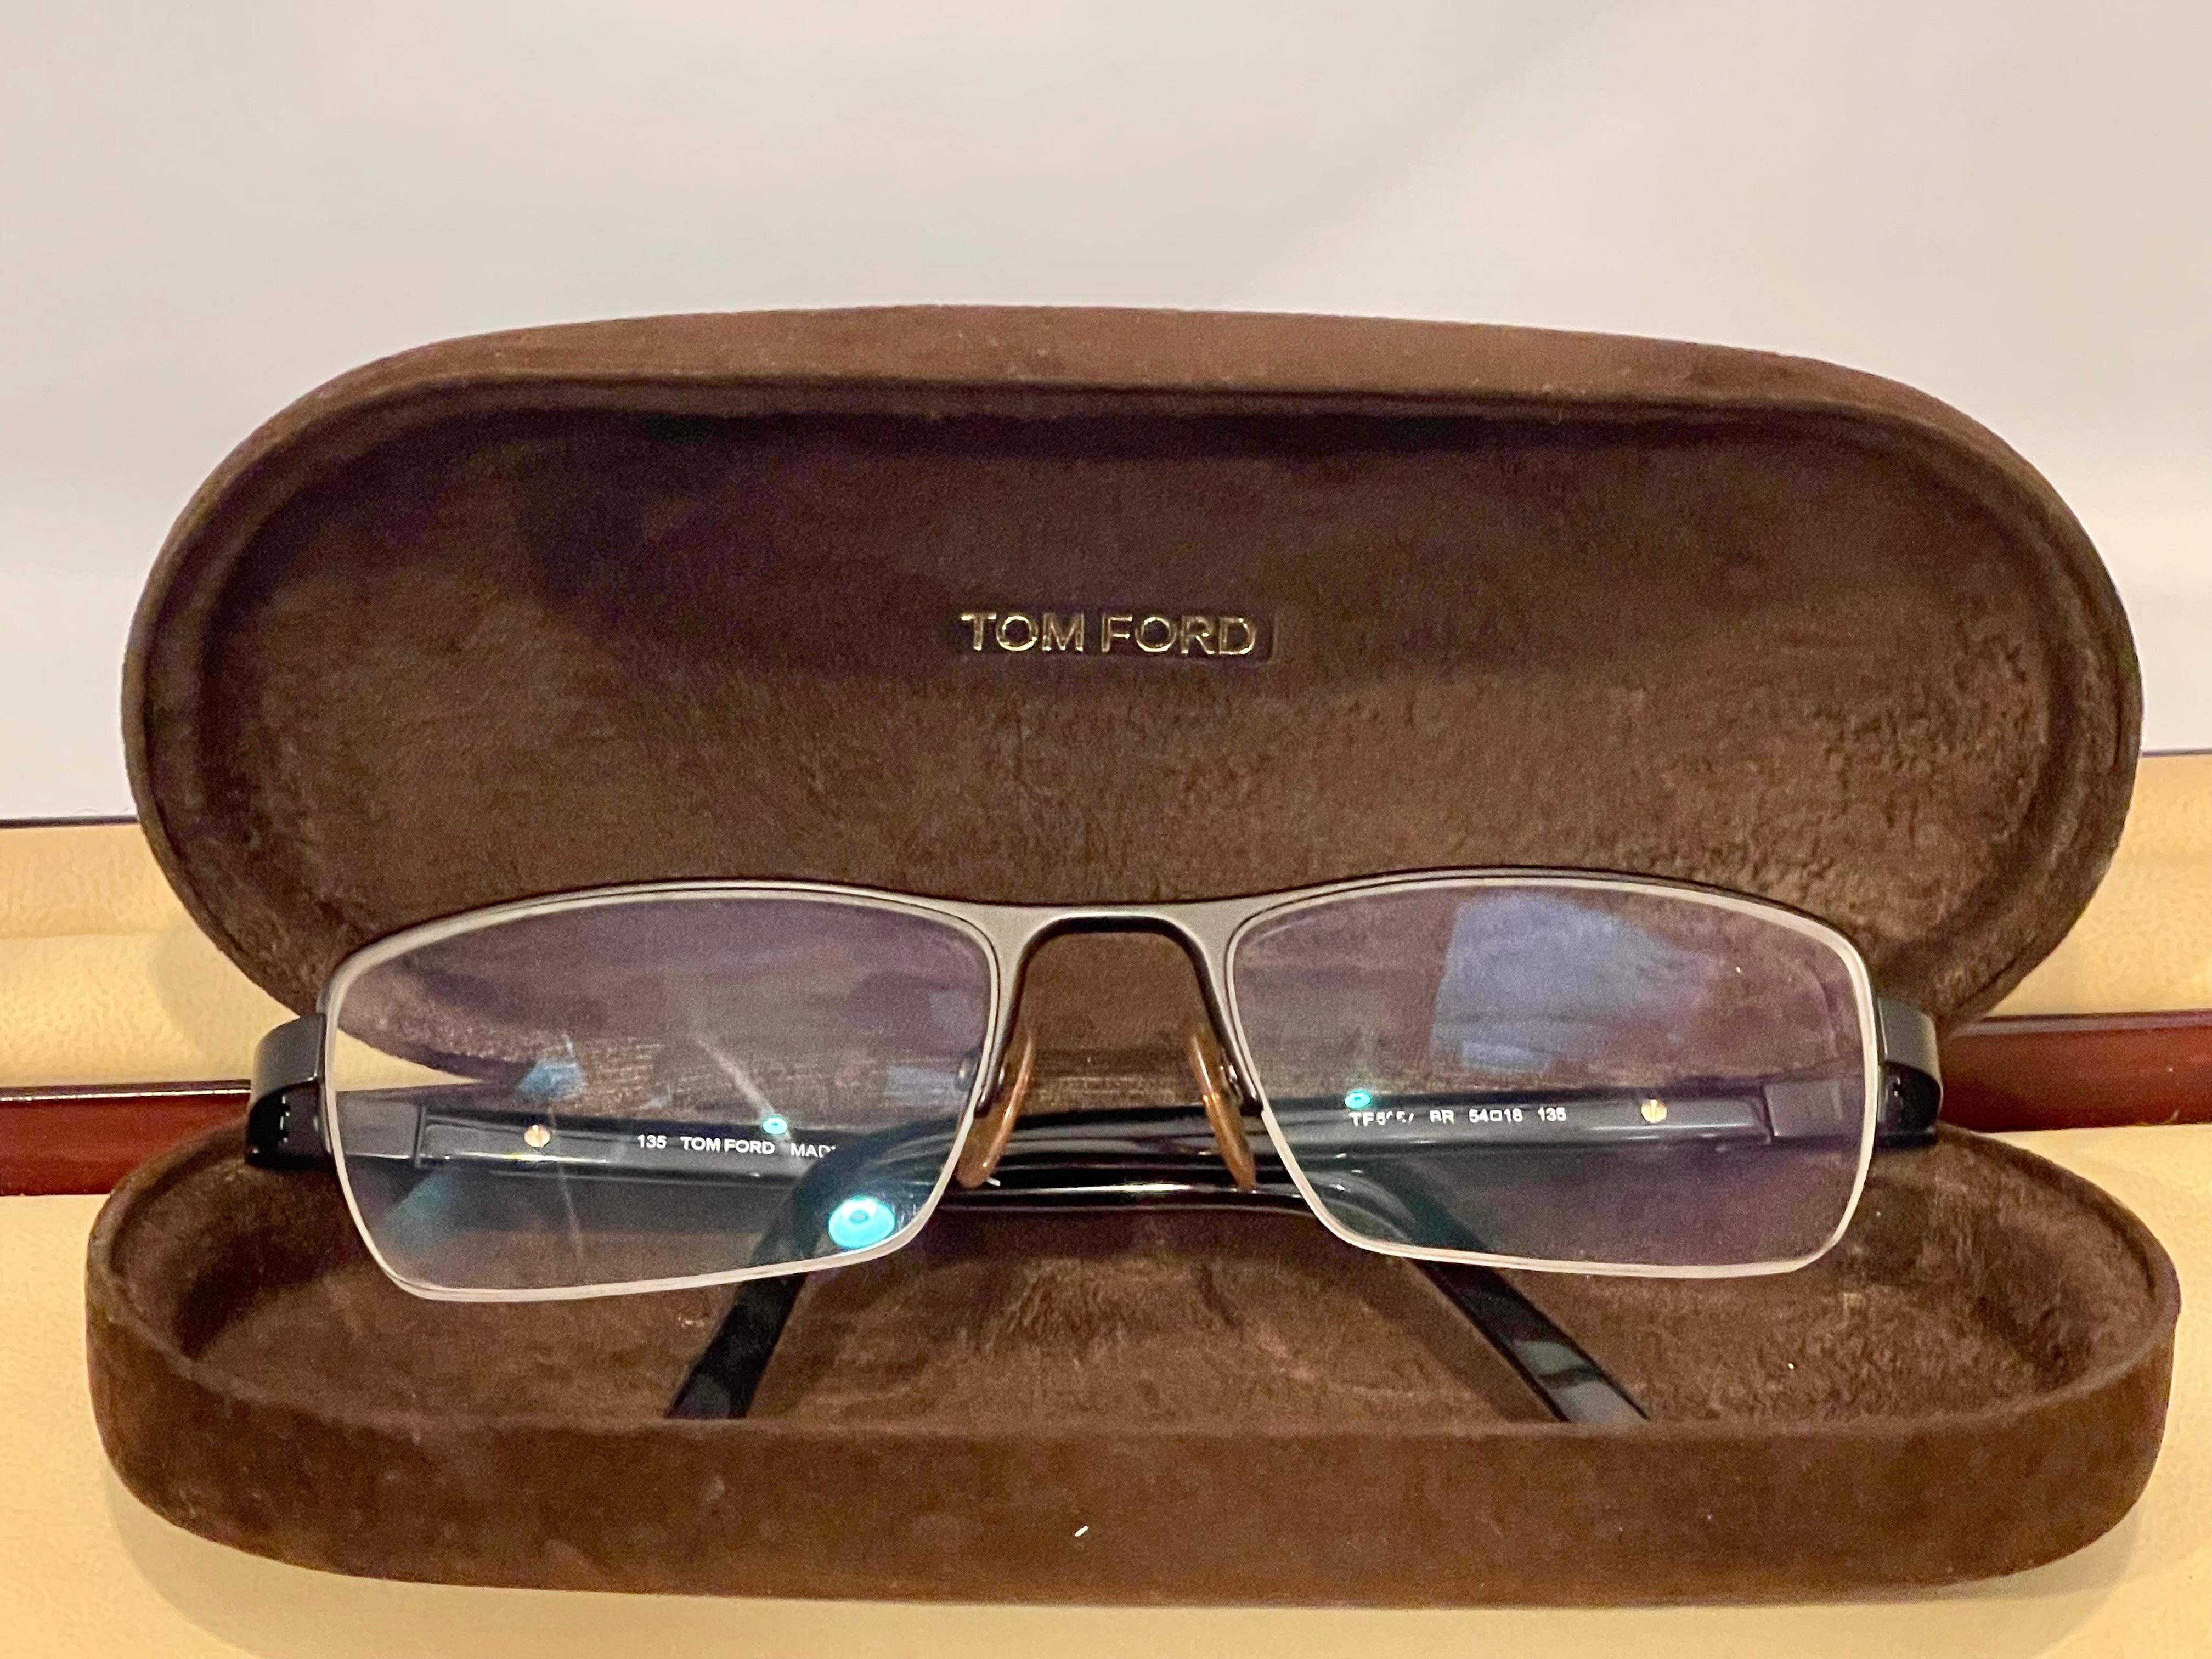 Tom Ford FT 5056 Rectangle Eyeglasses Solstice Sunglasses With Box For Sale 1